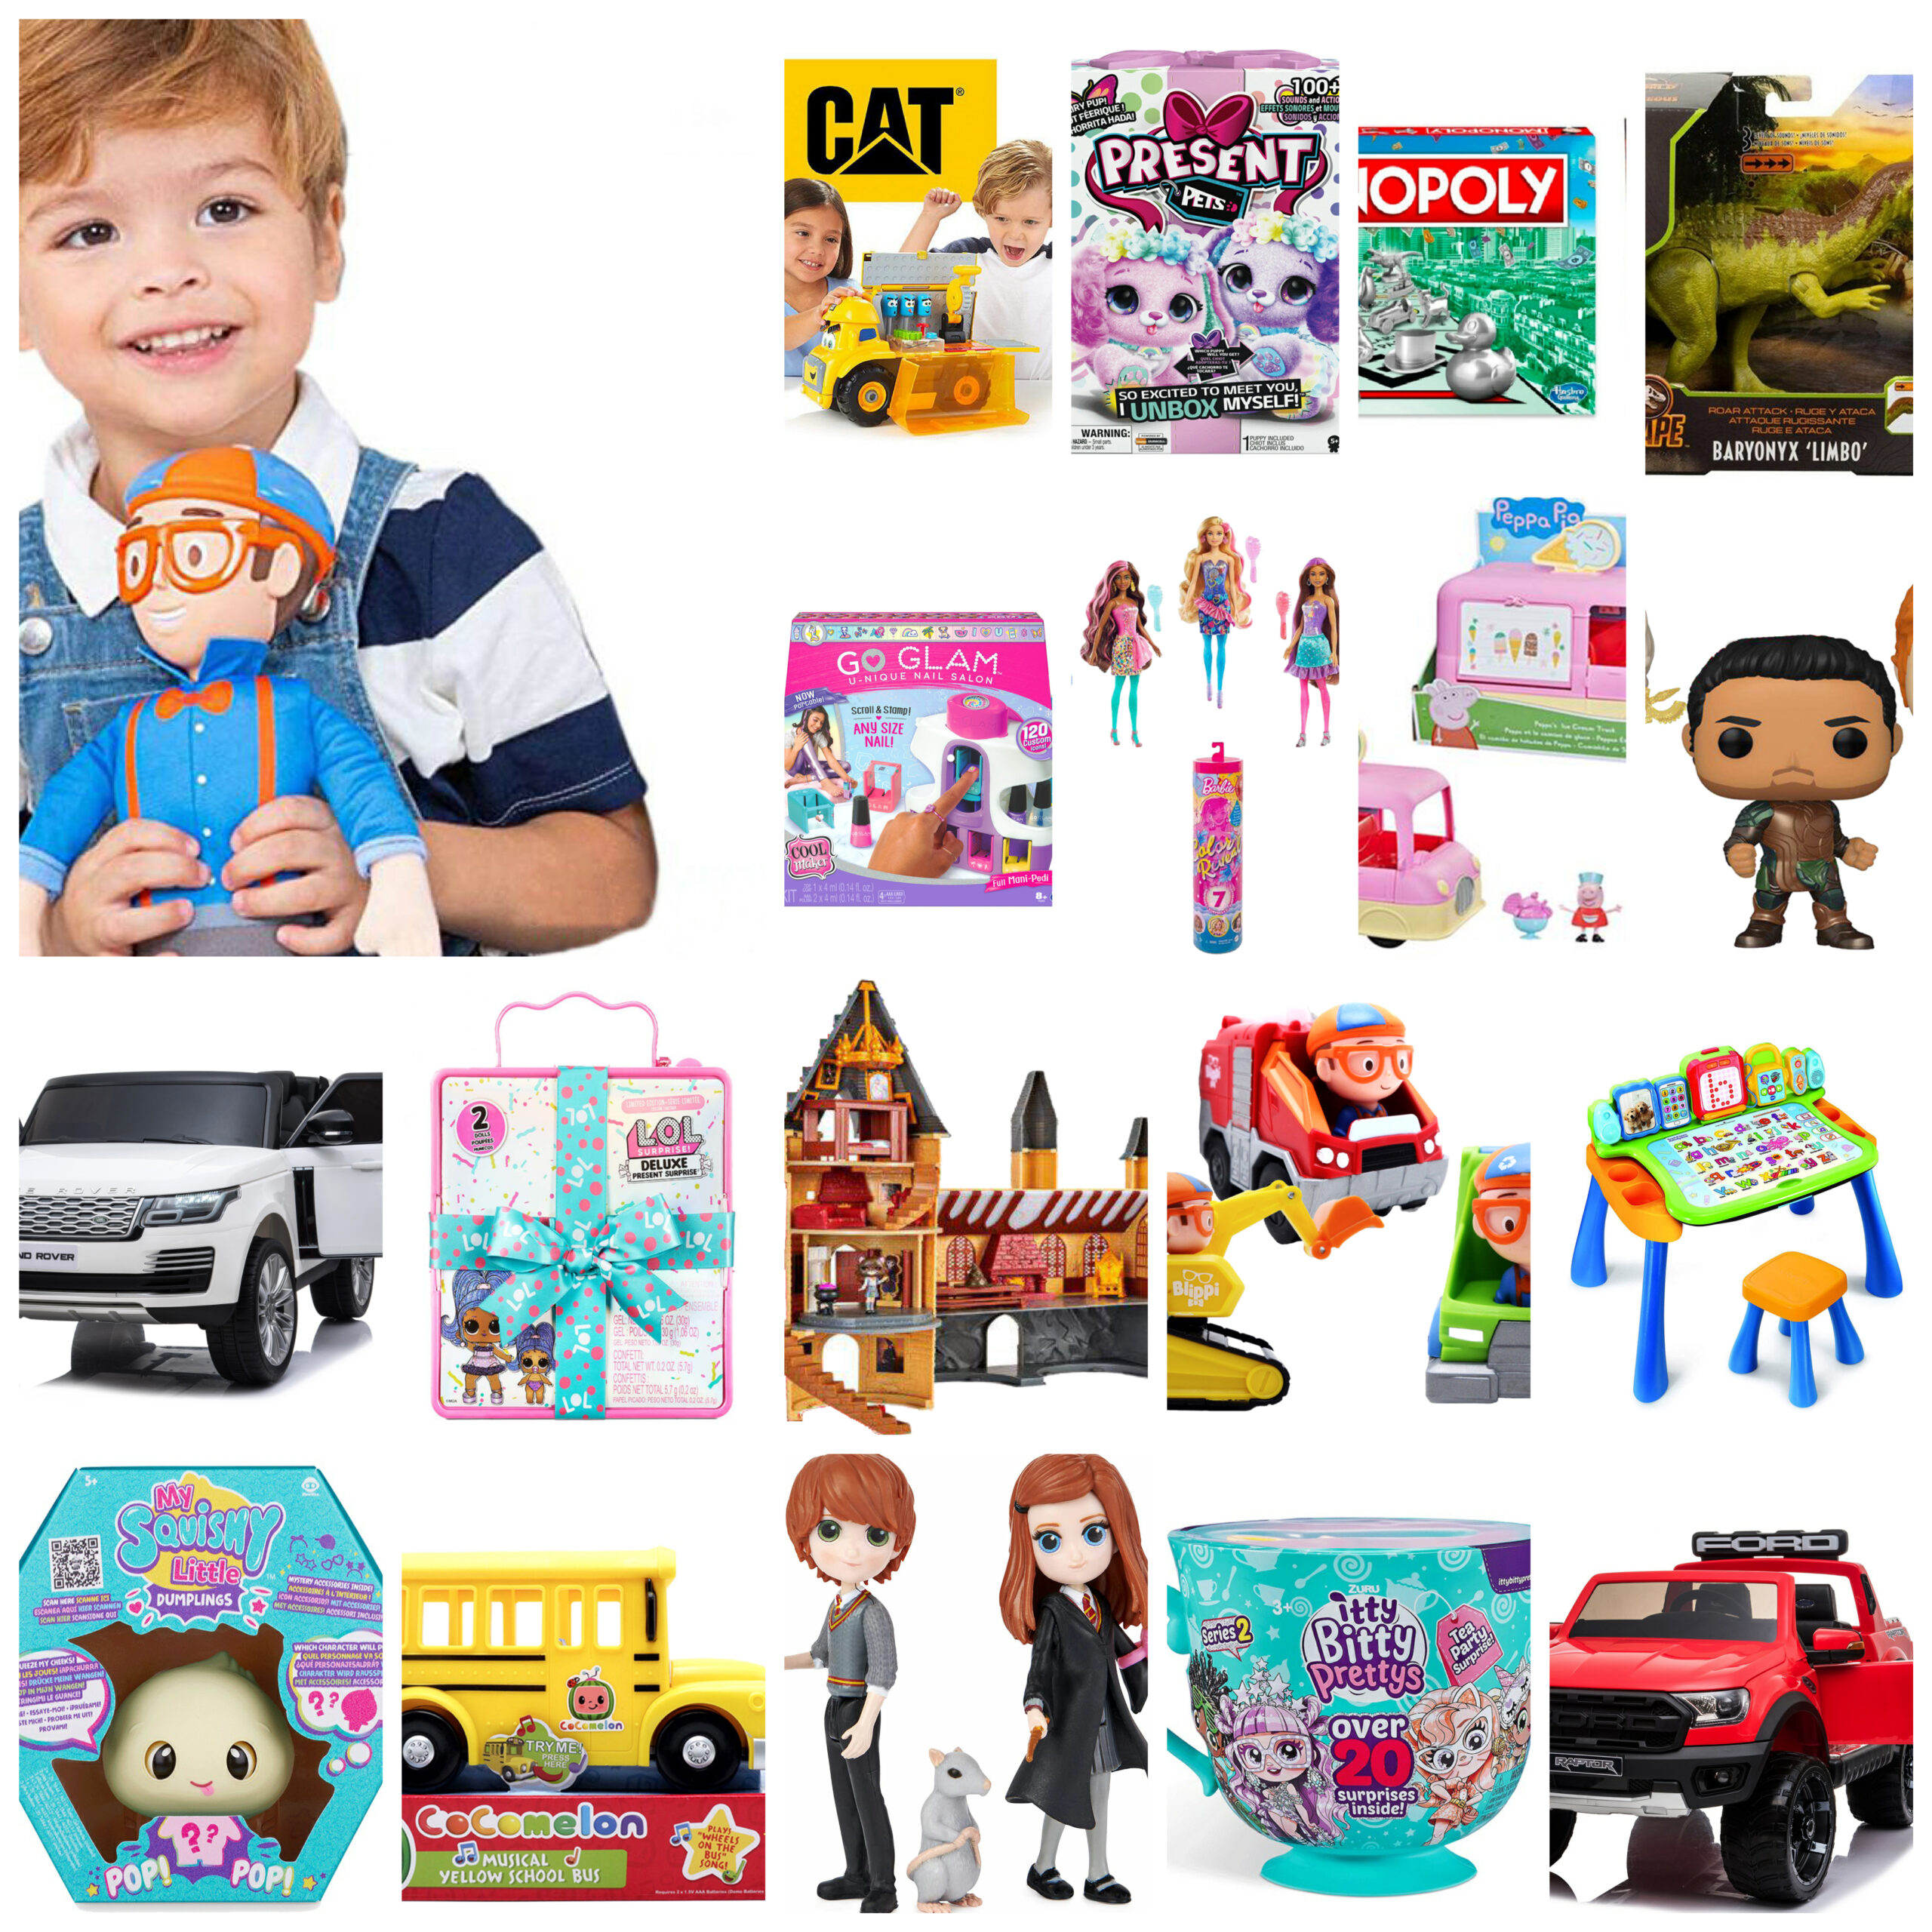 Toy Kingdom’s top toys for Christmas